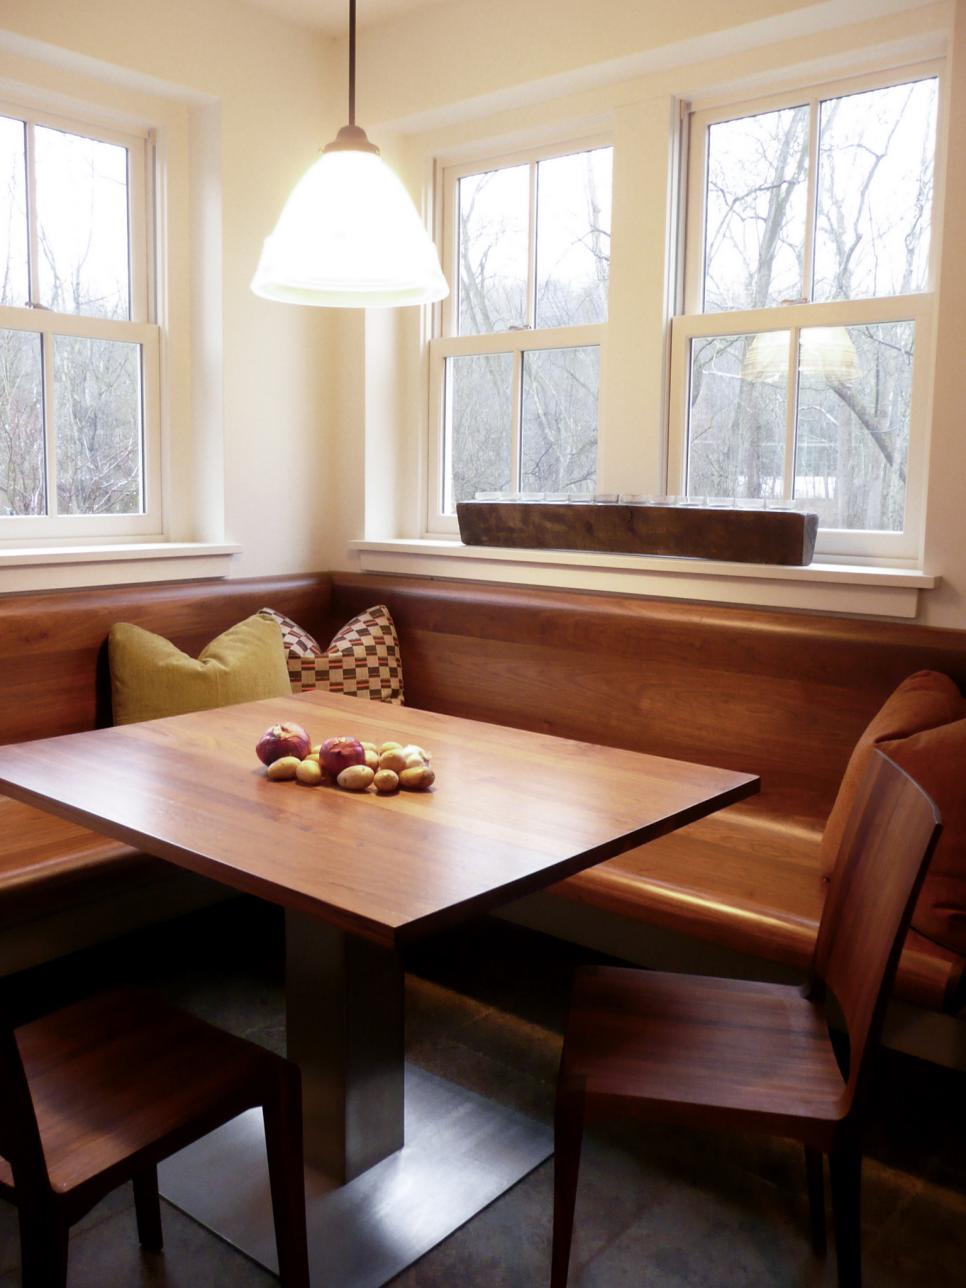 White Dining Nook With Windows Above Wood Banquette and Table